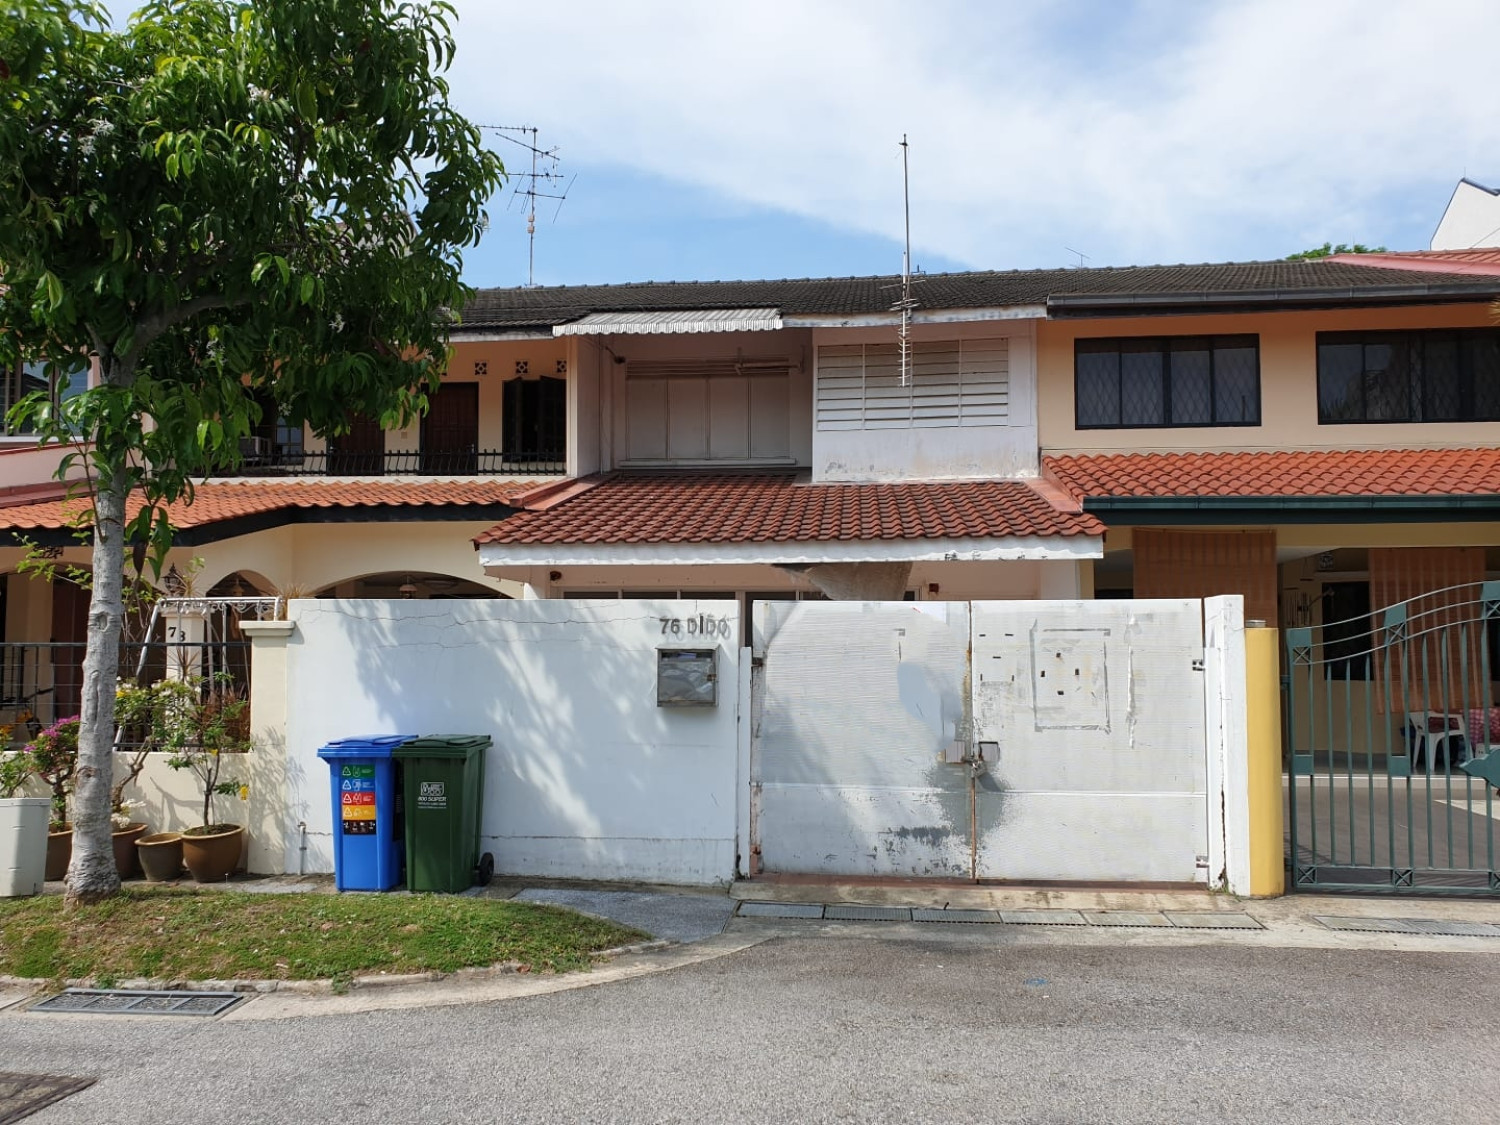 Terraced house in Changi bought without viewing for $2.2 mil - Property News